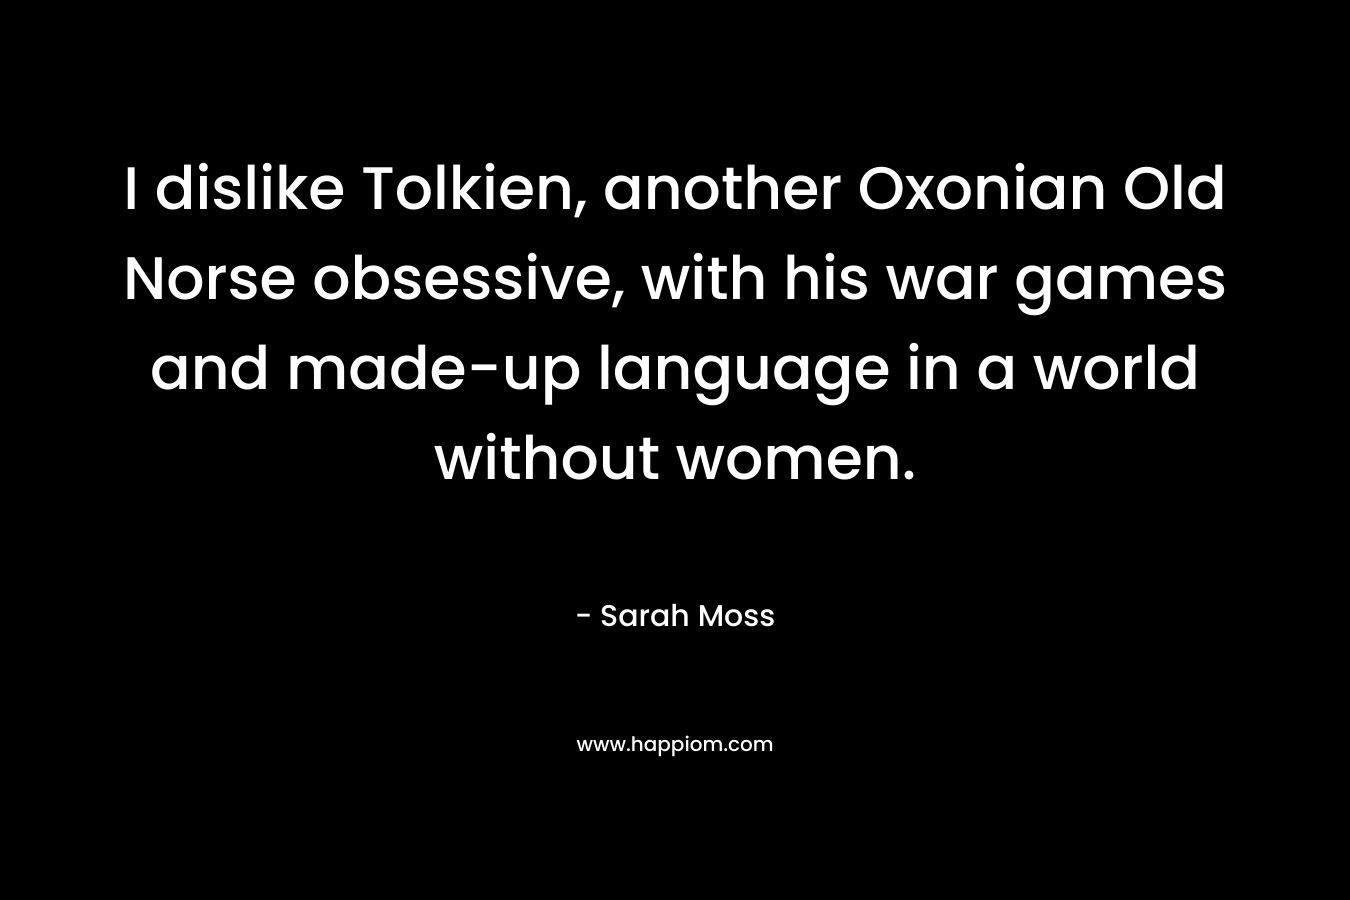 I dislike Tolkien, another Oxonian Old Norse obsessive, with his war games and made-up language in a world without women. – Sarah Moss